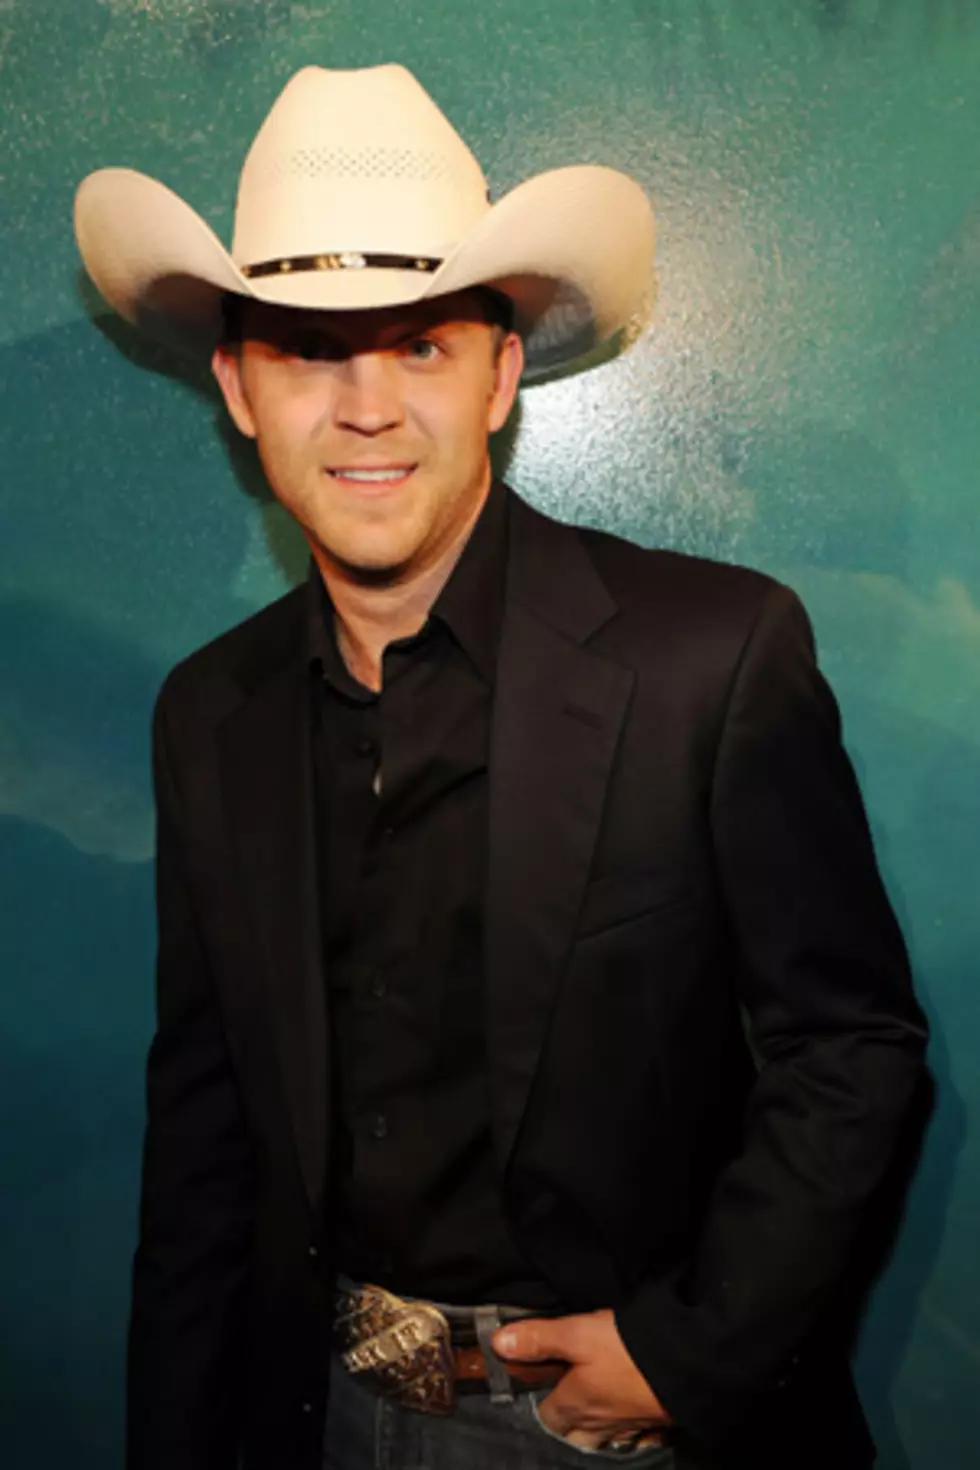 Justin Moore Kicked Out of Restaurant